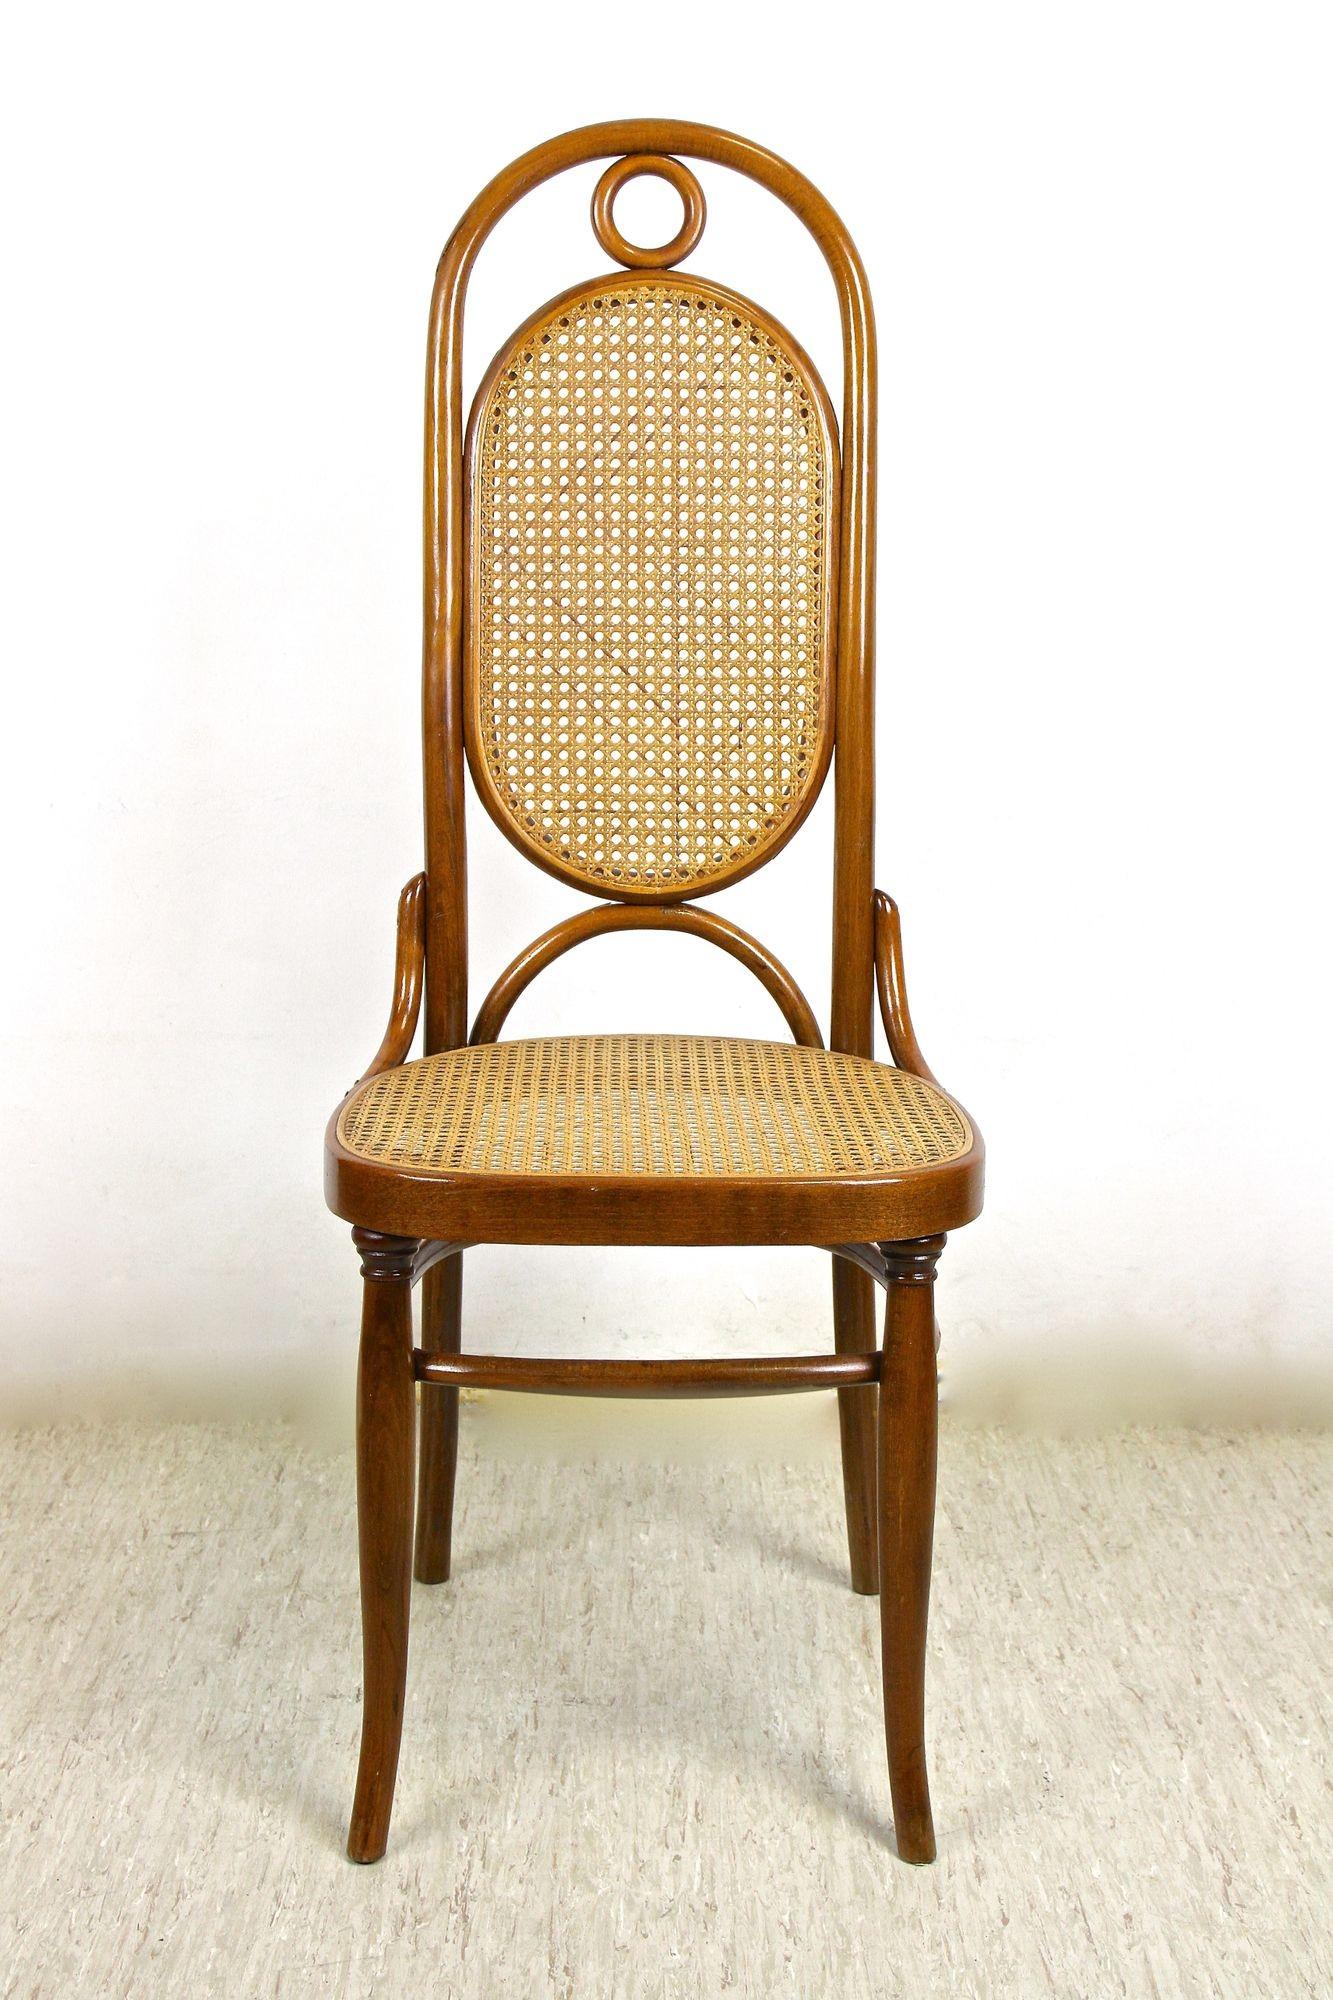 Polished Thonet Bentwood Chairs with Table, Art Nouveau Seating Set, Austria, circa 1915 For Sale